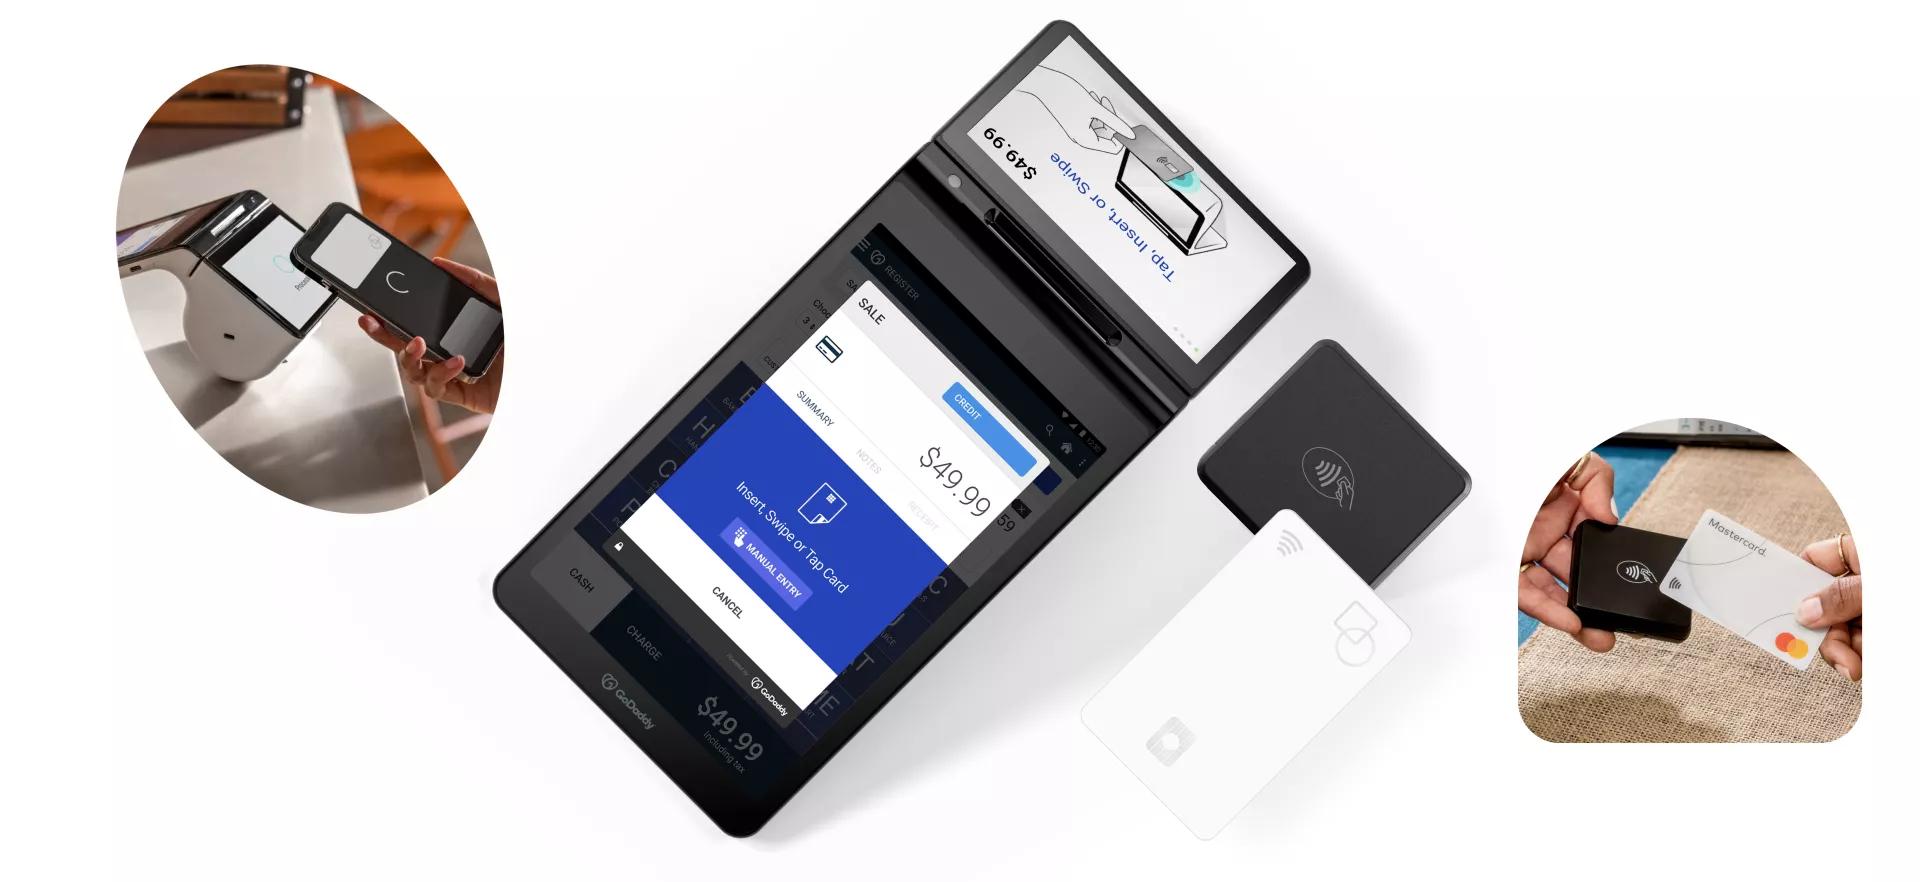 Square Terminal - Credit Card Machine to Accept All Payments | Mobile POS